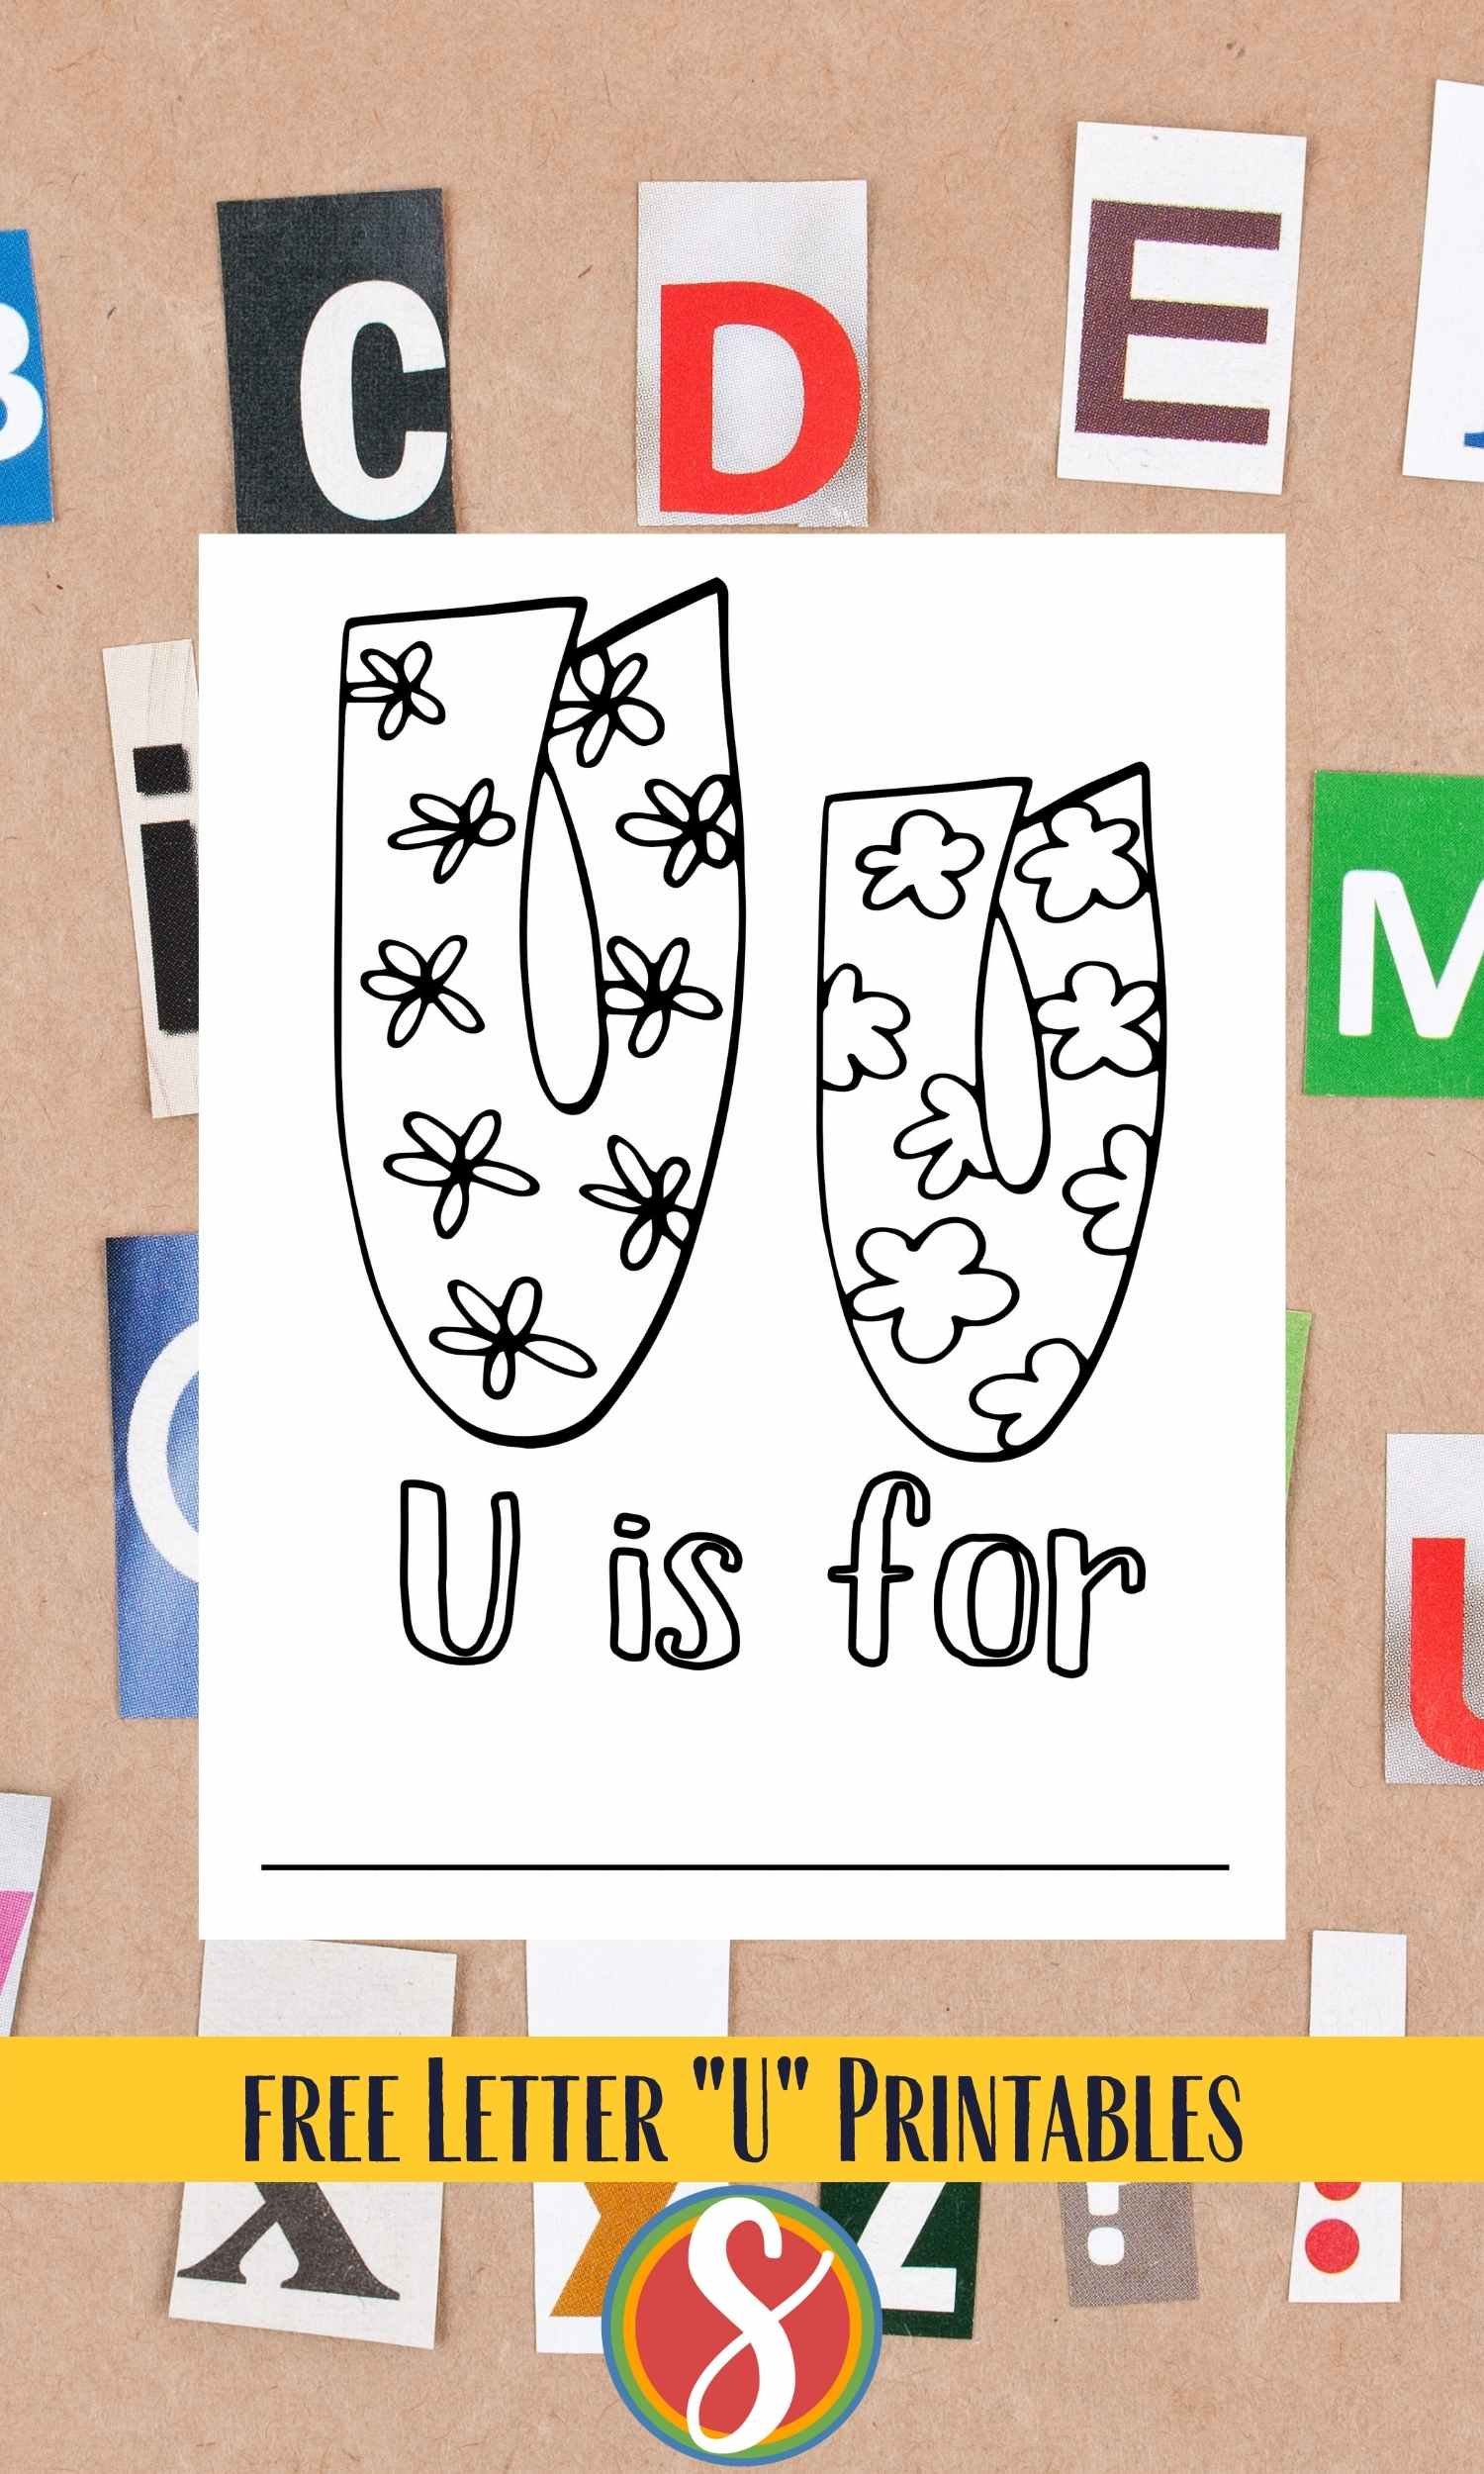 bubble letters "Uu" with flowers inside to color